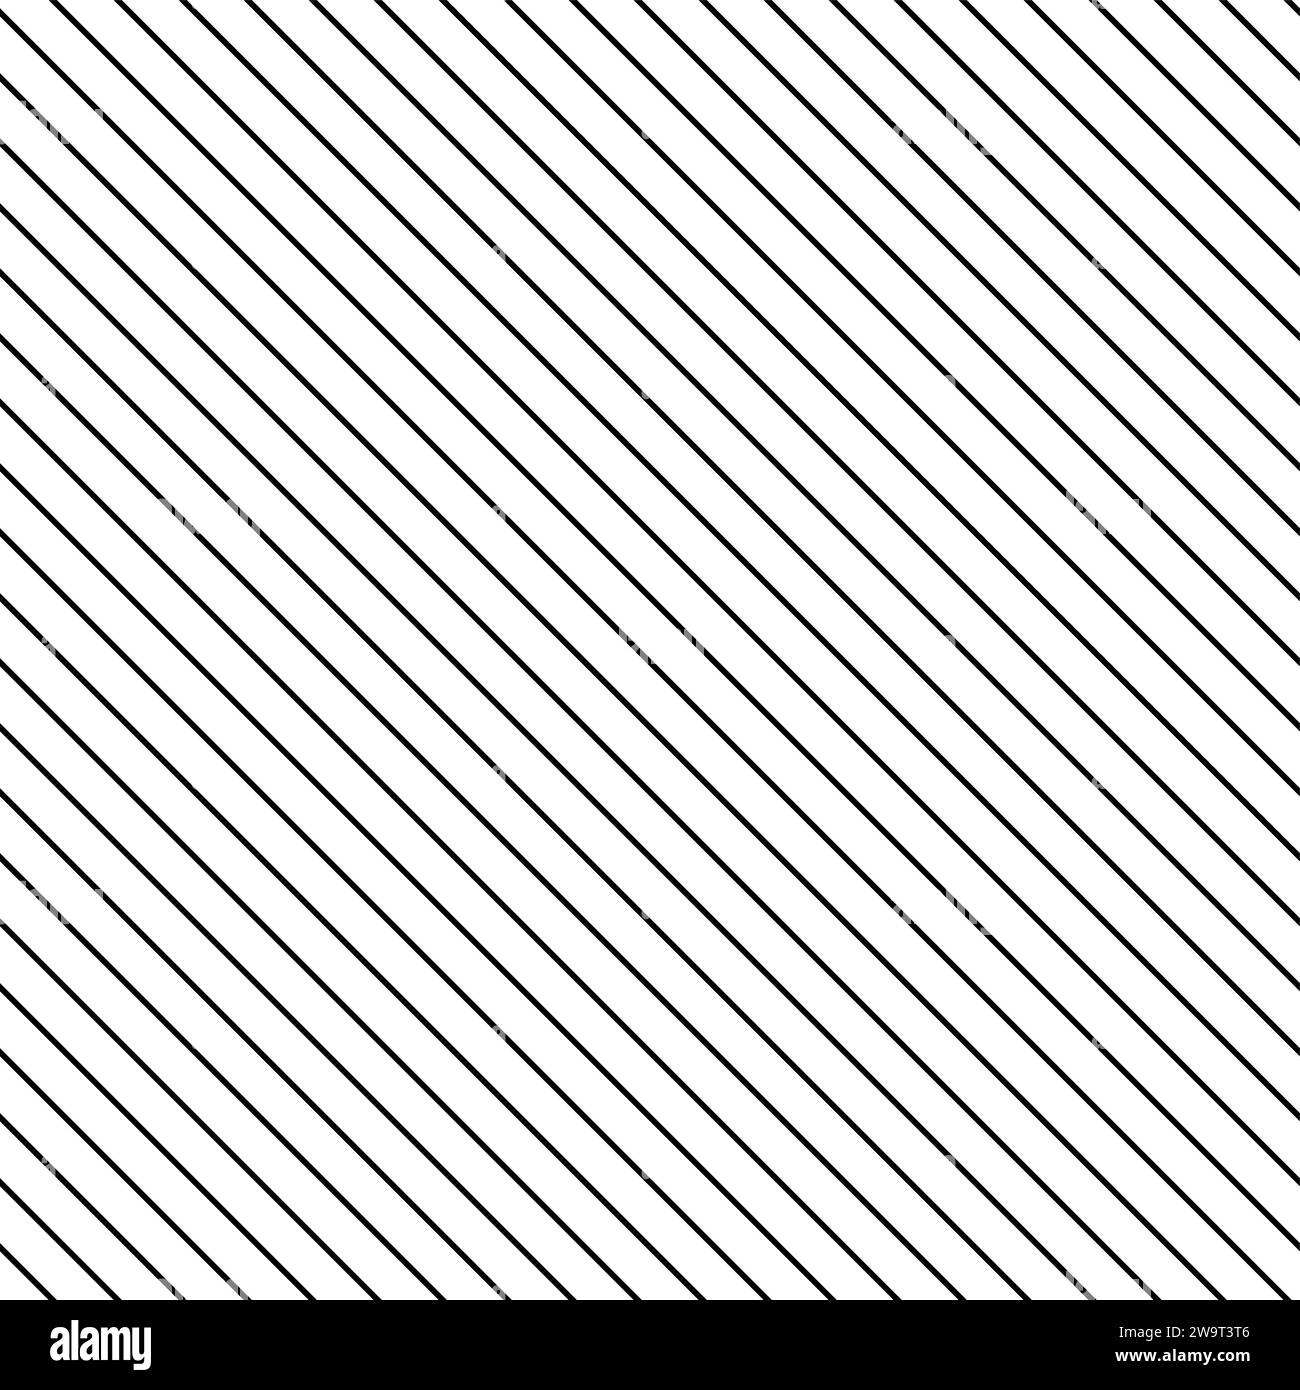 diagonal hatching pattern, black and white slanted lines - vector seamless repeatable texture Stock Vector